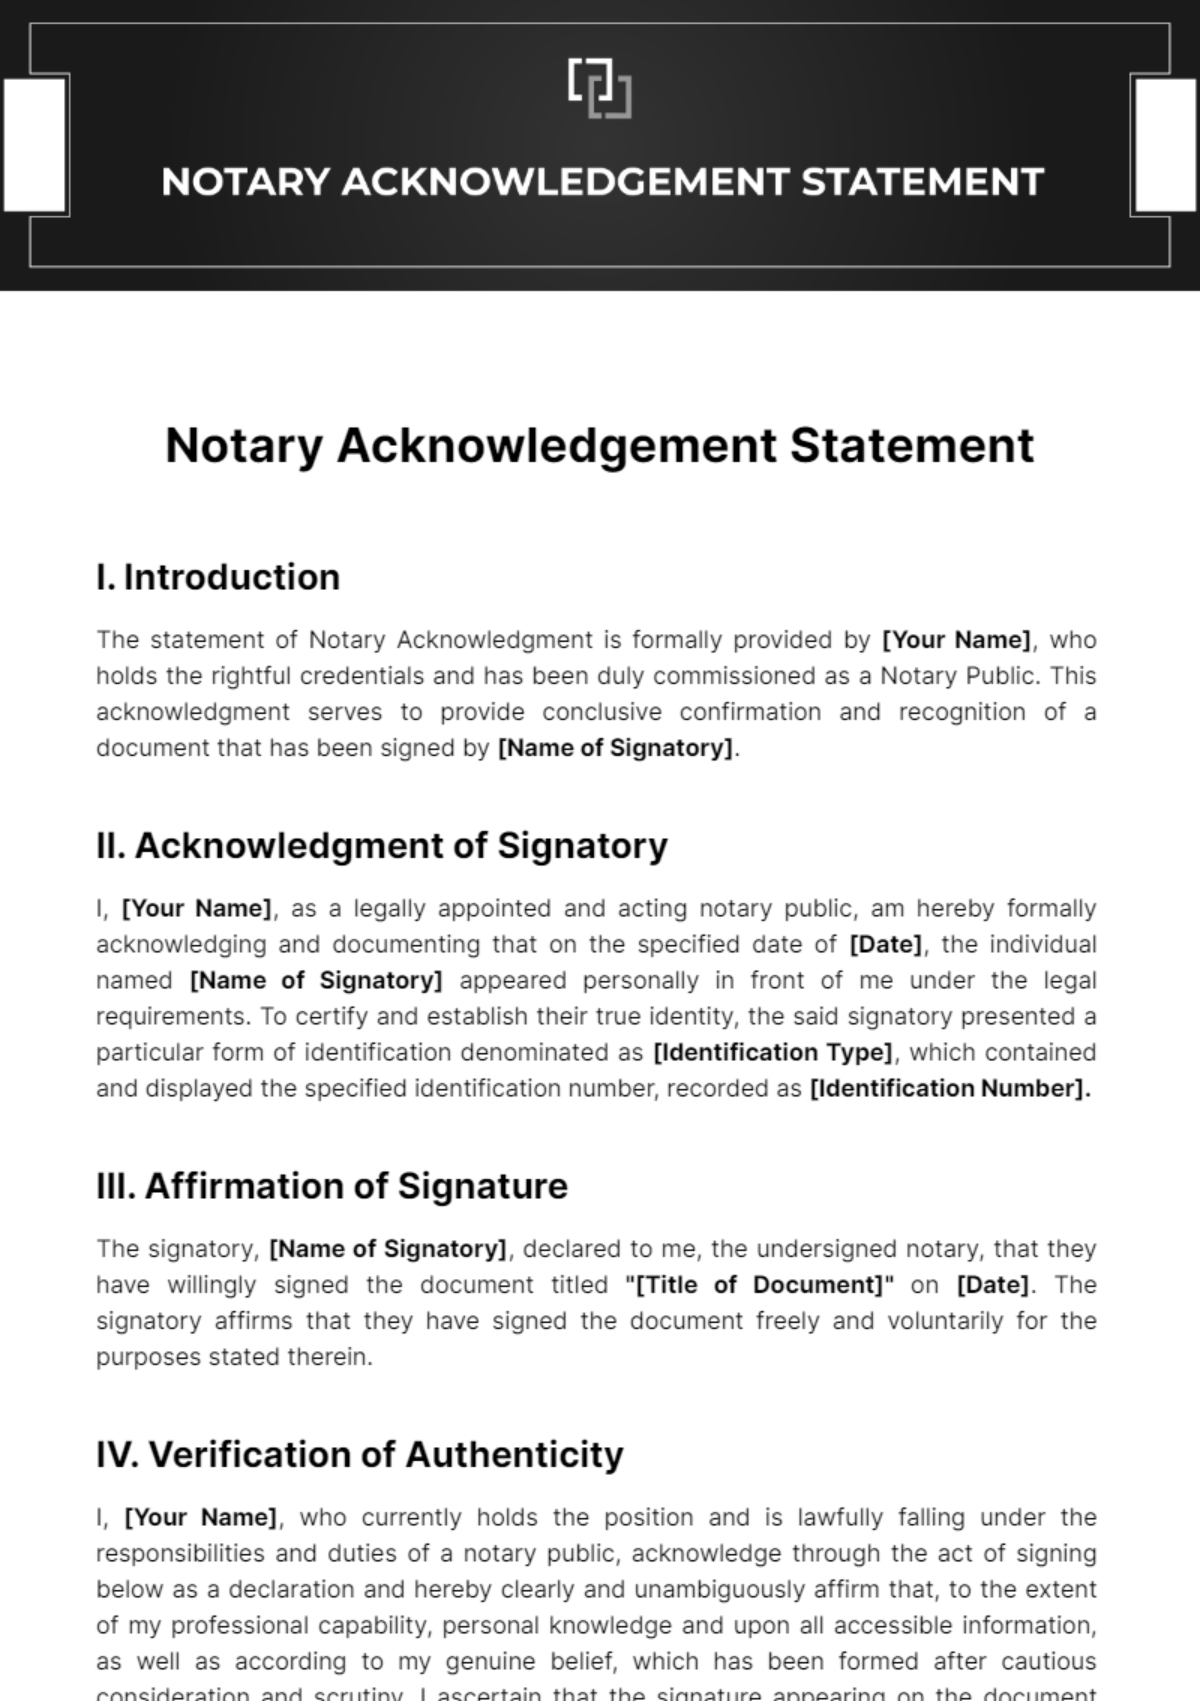 Free Notary Acknowledgement Statement Template